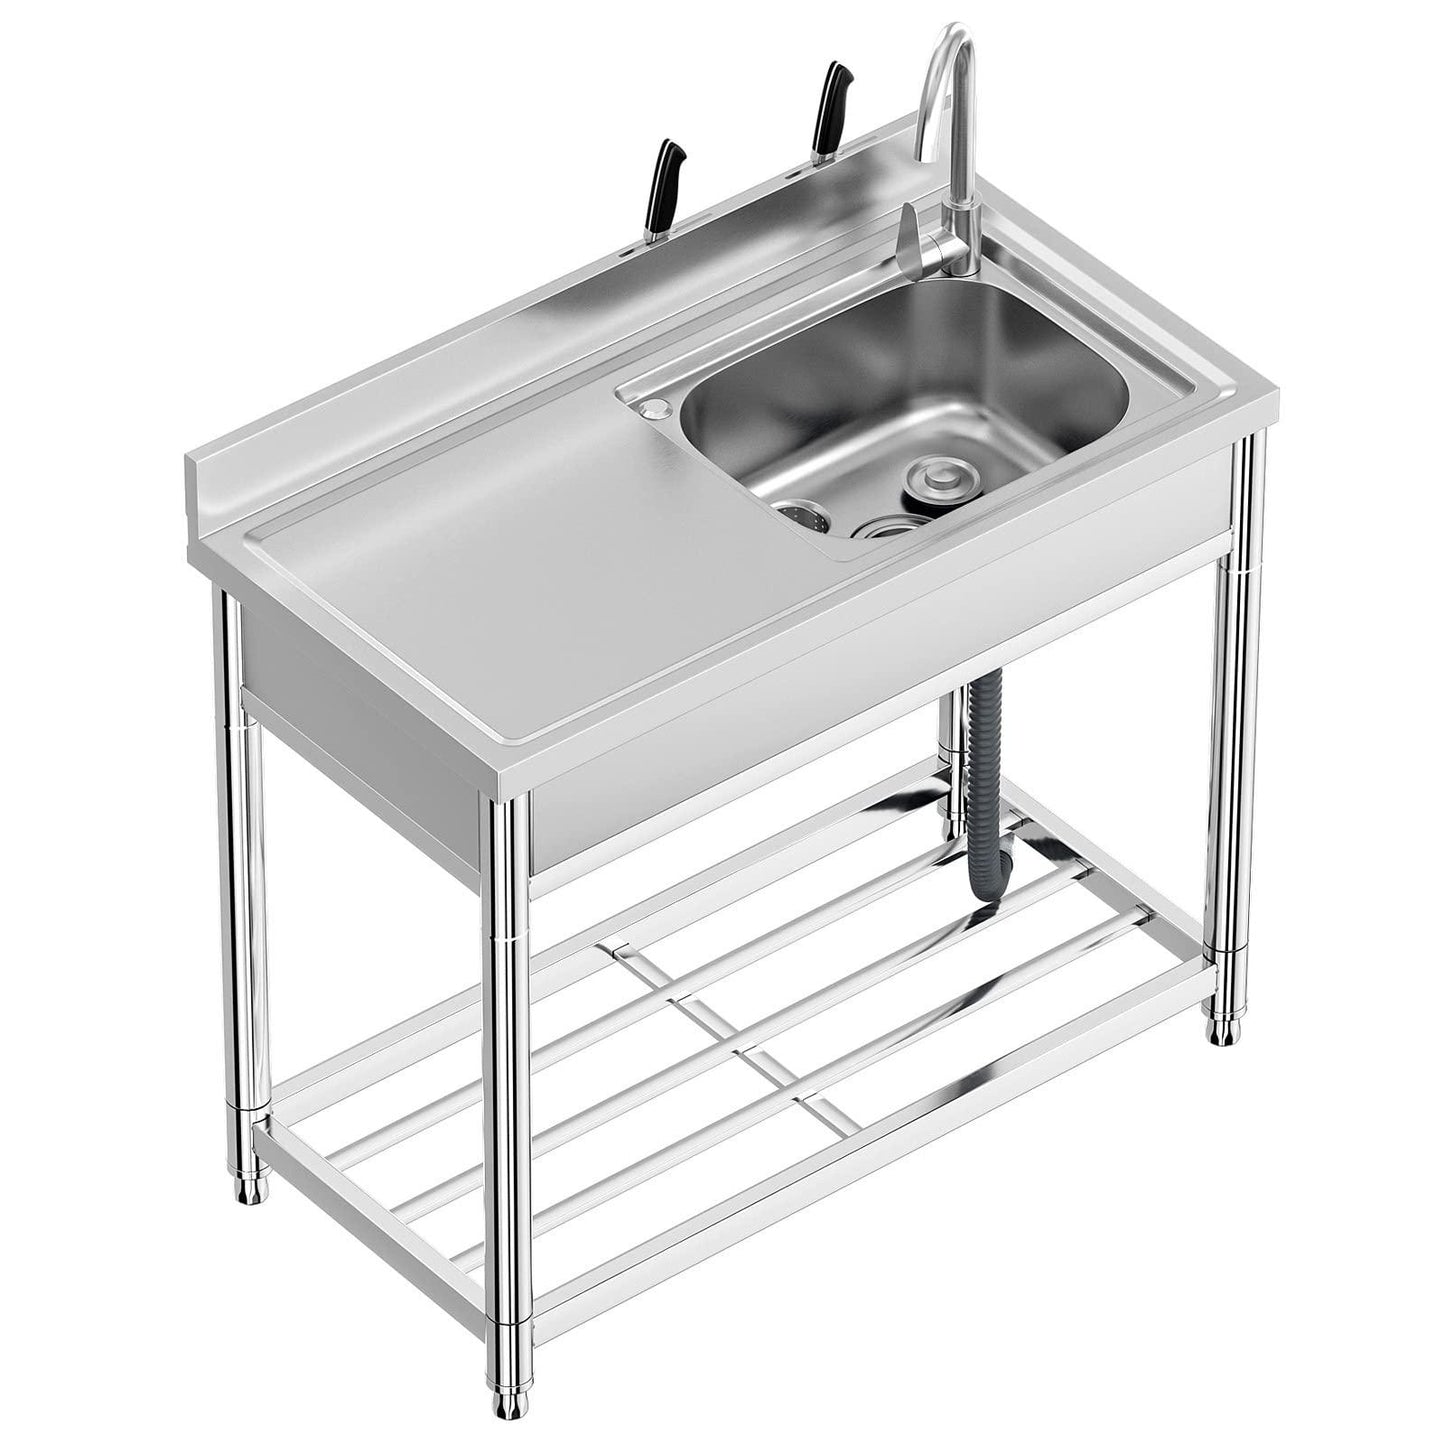 Free Standing Stainless-Steel Single Bowl Commercial Restaurant Kitchen Sink Set w/Faucet & Drainboard, Prep & Utility Washing Hand Basin w/Workbench & Storage Shelves Indoor Outdoor (39 in) - CookCave